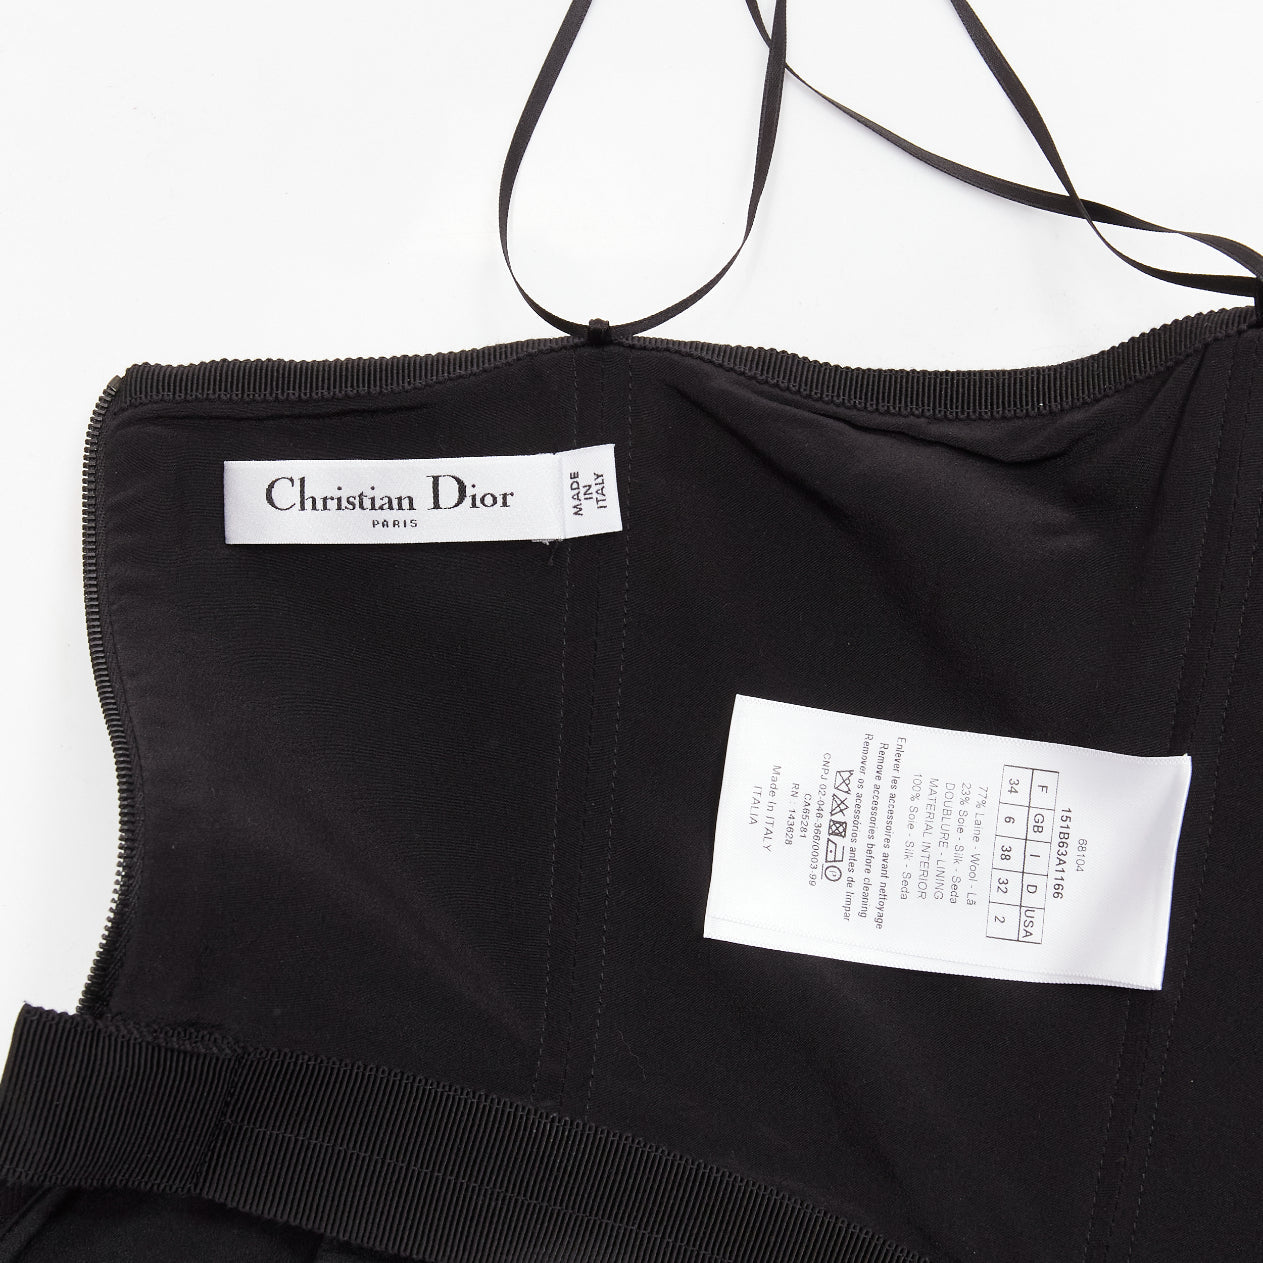 100% Authenticity Guaranteed Dior Black Wool Top on Sale. Available at  JHROP jhrop_official